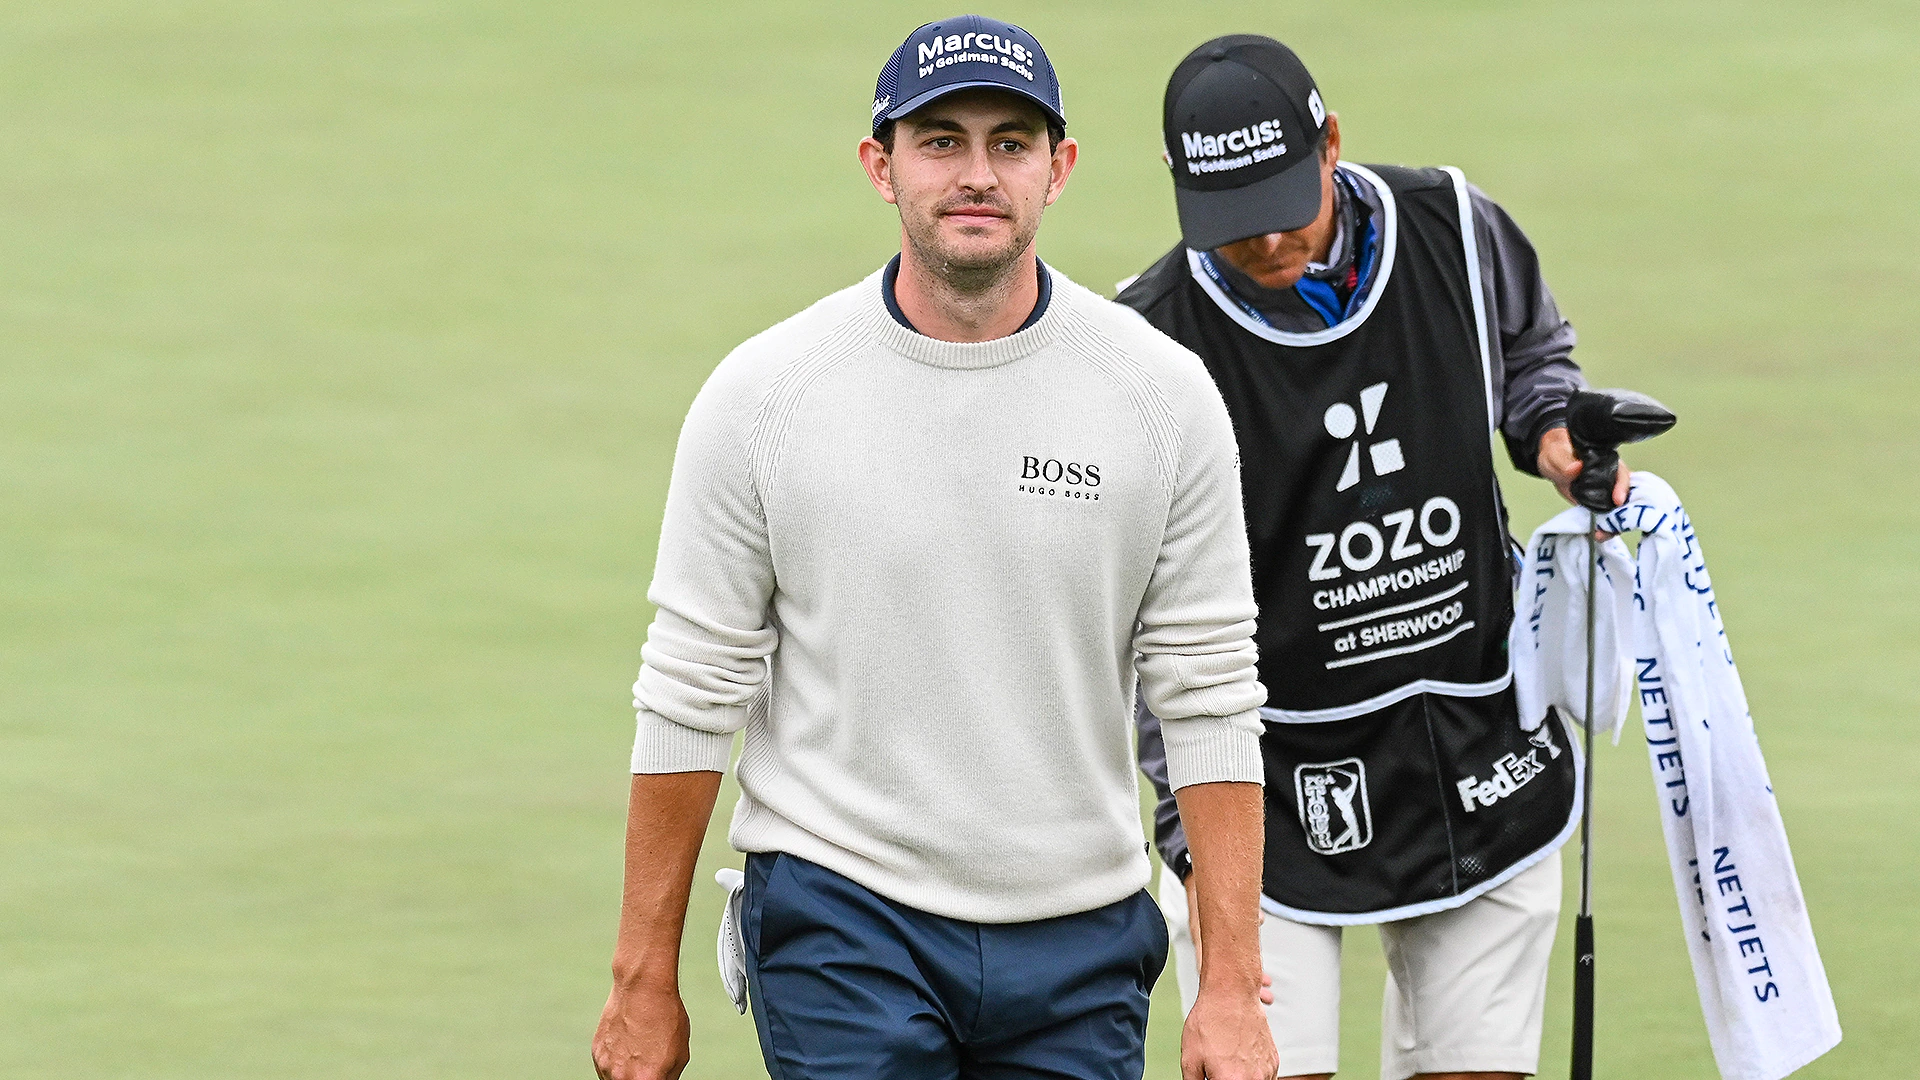 Not quite a home win for Patrick Cantlay but a sweet one at Zozo Championship